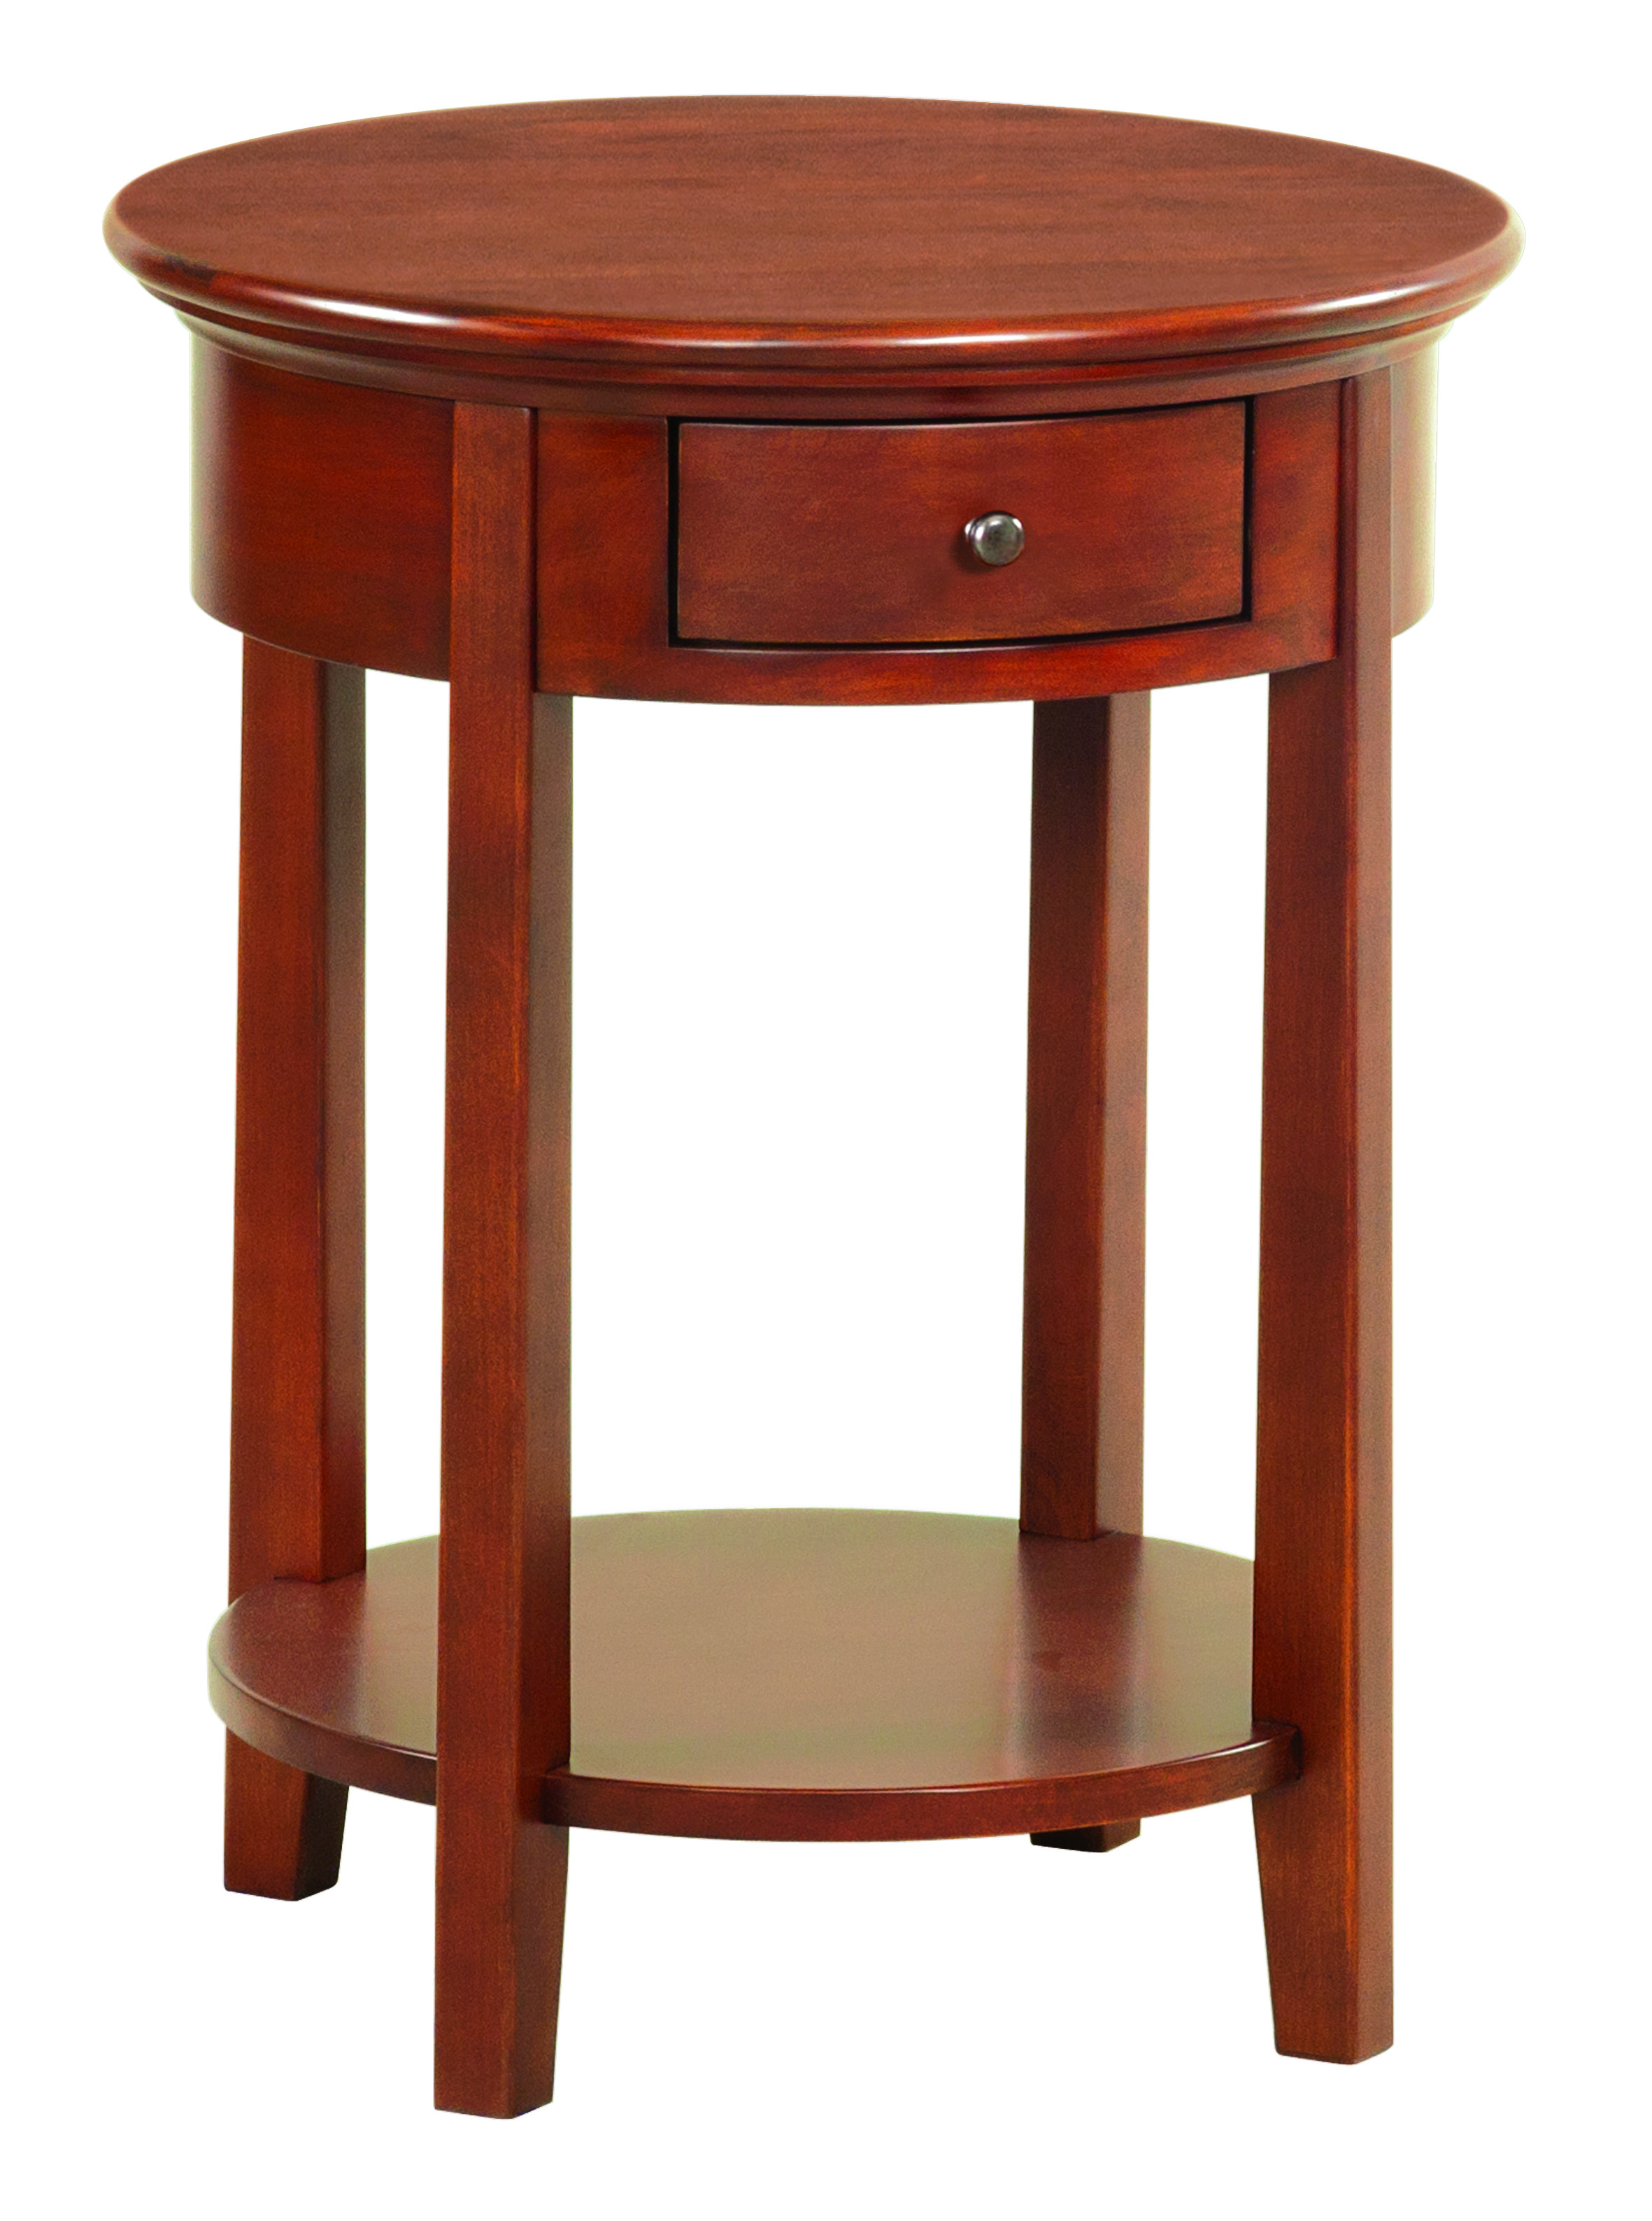 3495 Mckenzie Round Side Table With, Antique Round Side Table With Drawer